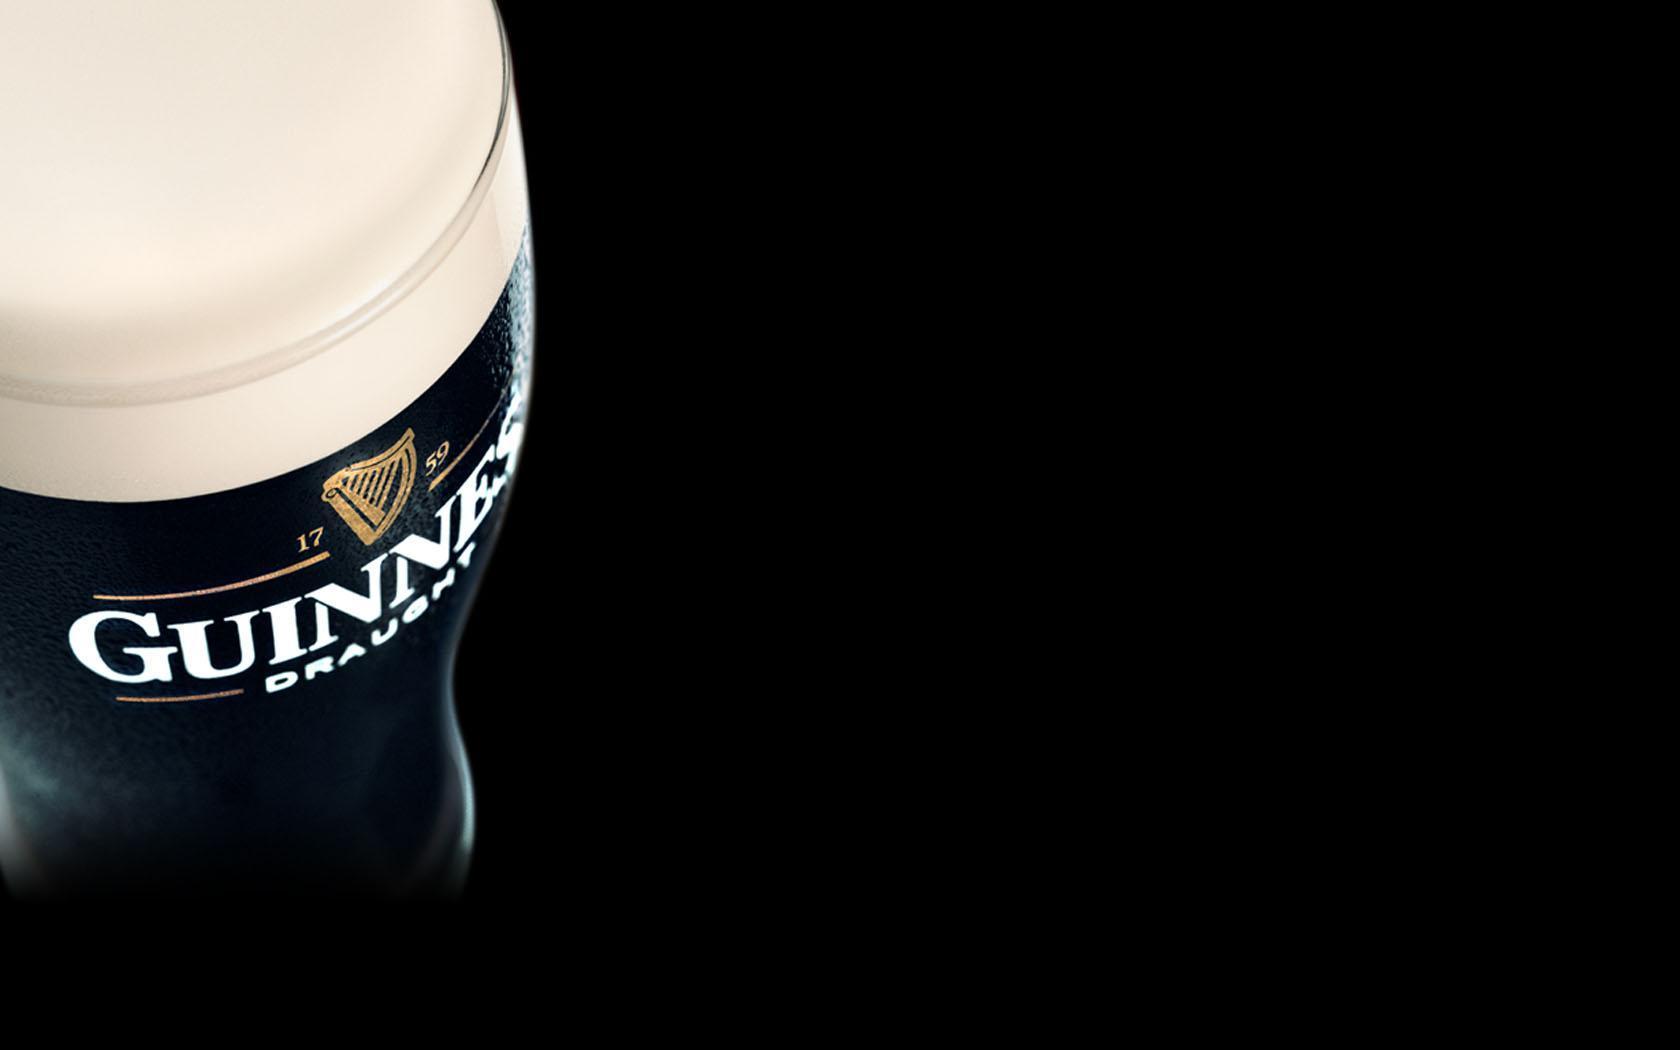 Alcohol beer, drinks, guinness, wallpaper. HD Wallpaper Picture